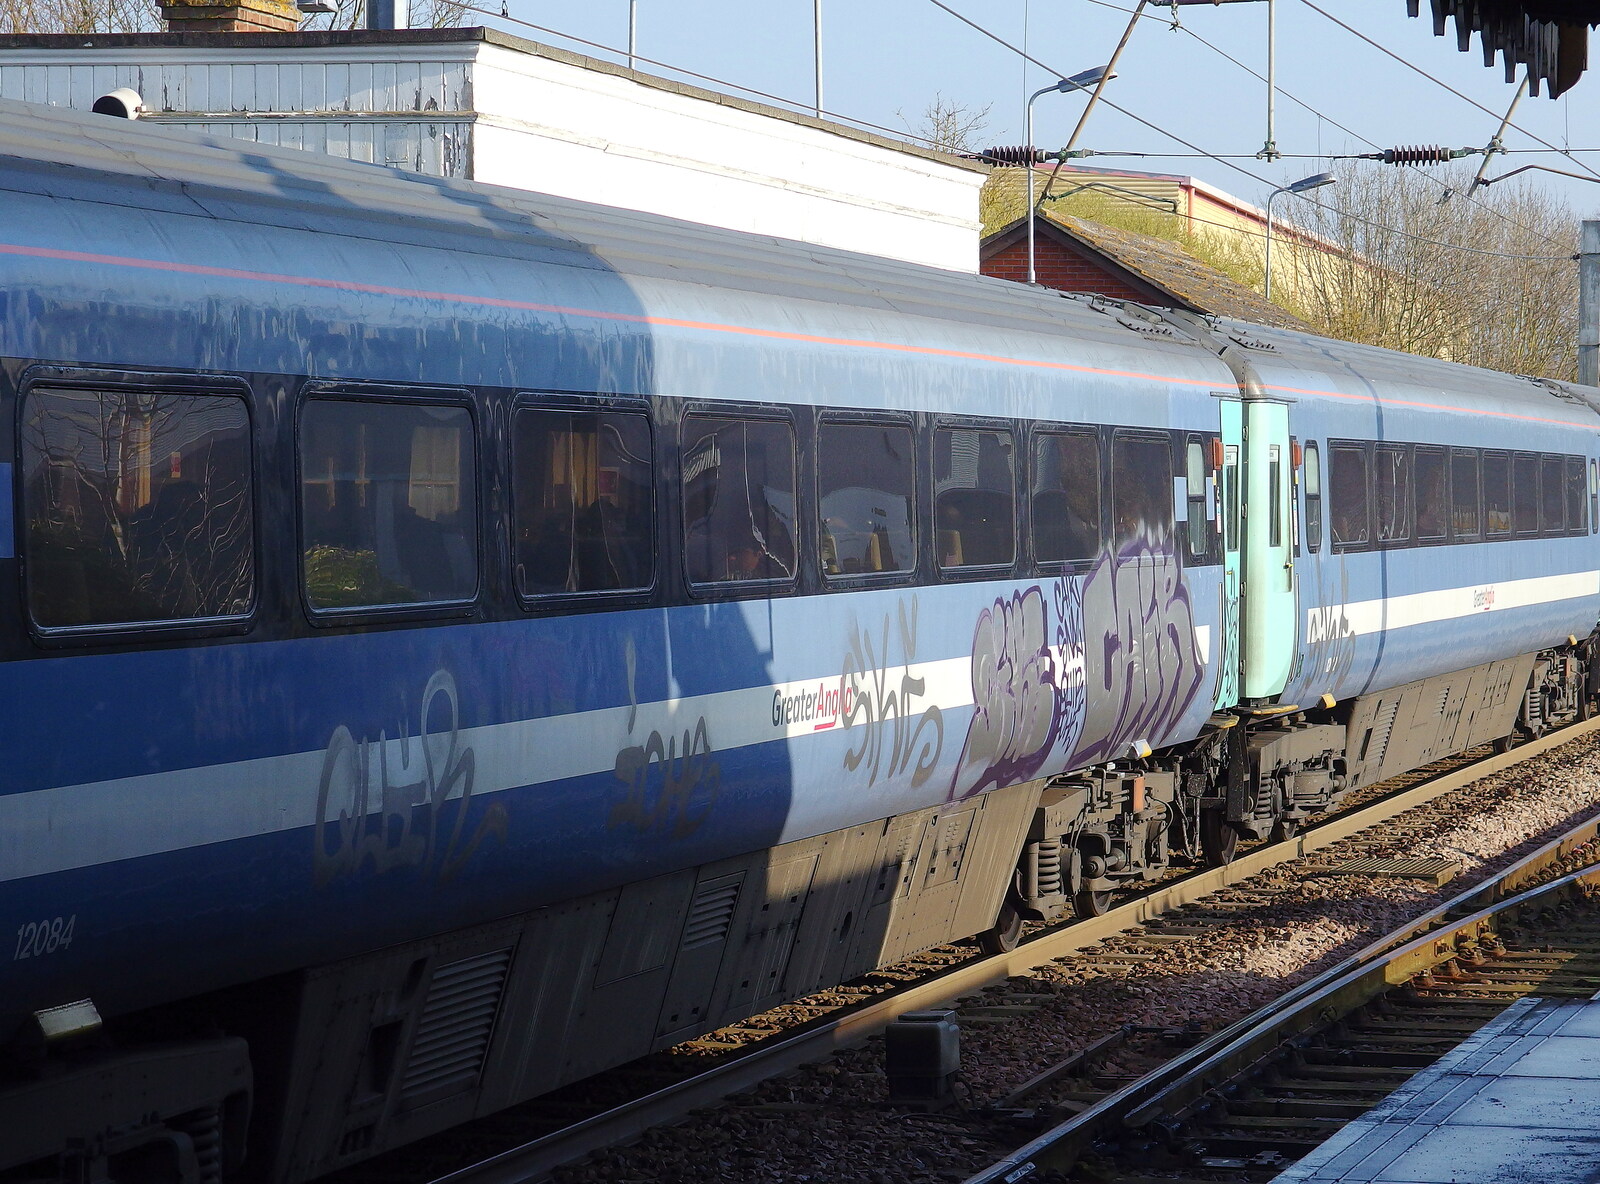 Another Greater Anglia coach gets graffiti on it from Emily Comes to Visit, Brome, Suffolk - 15th March 2014